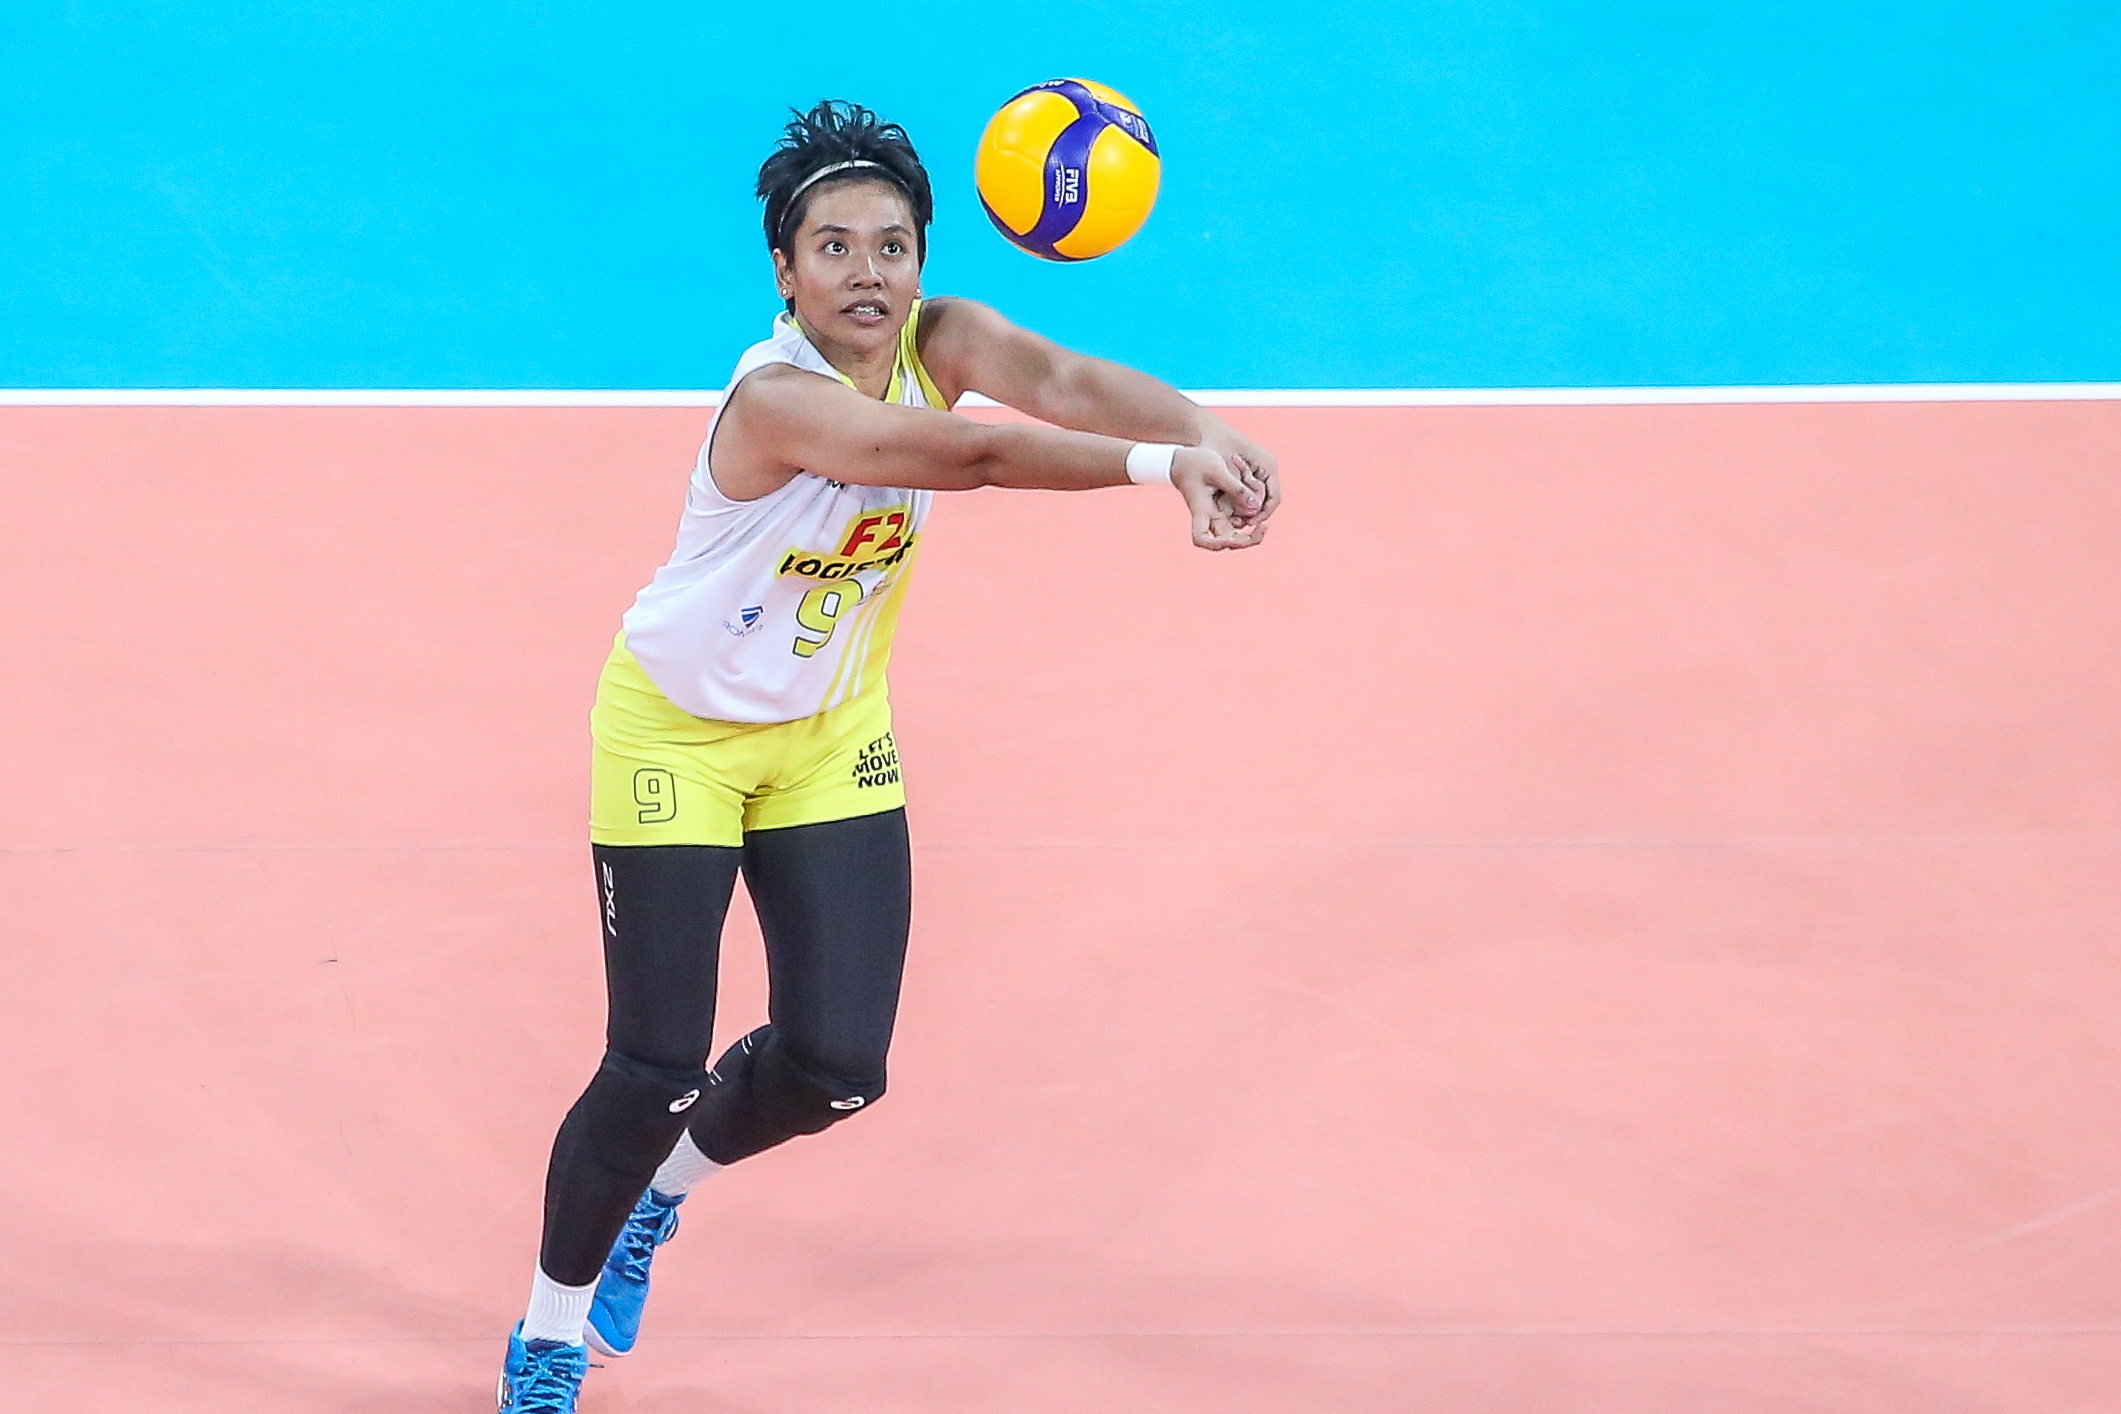 PVL: Kim Fajardo eager to tackle new challenges with PLDT